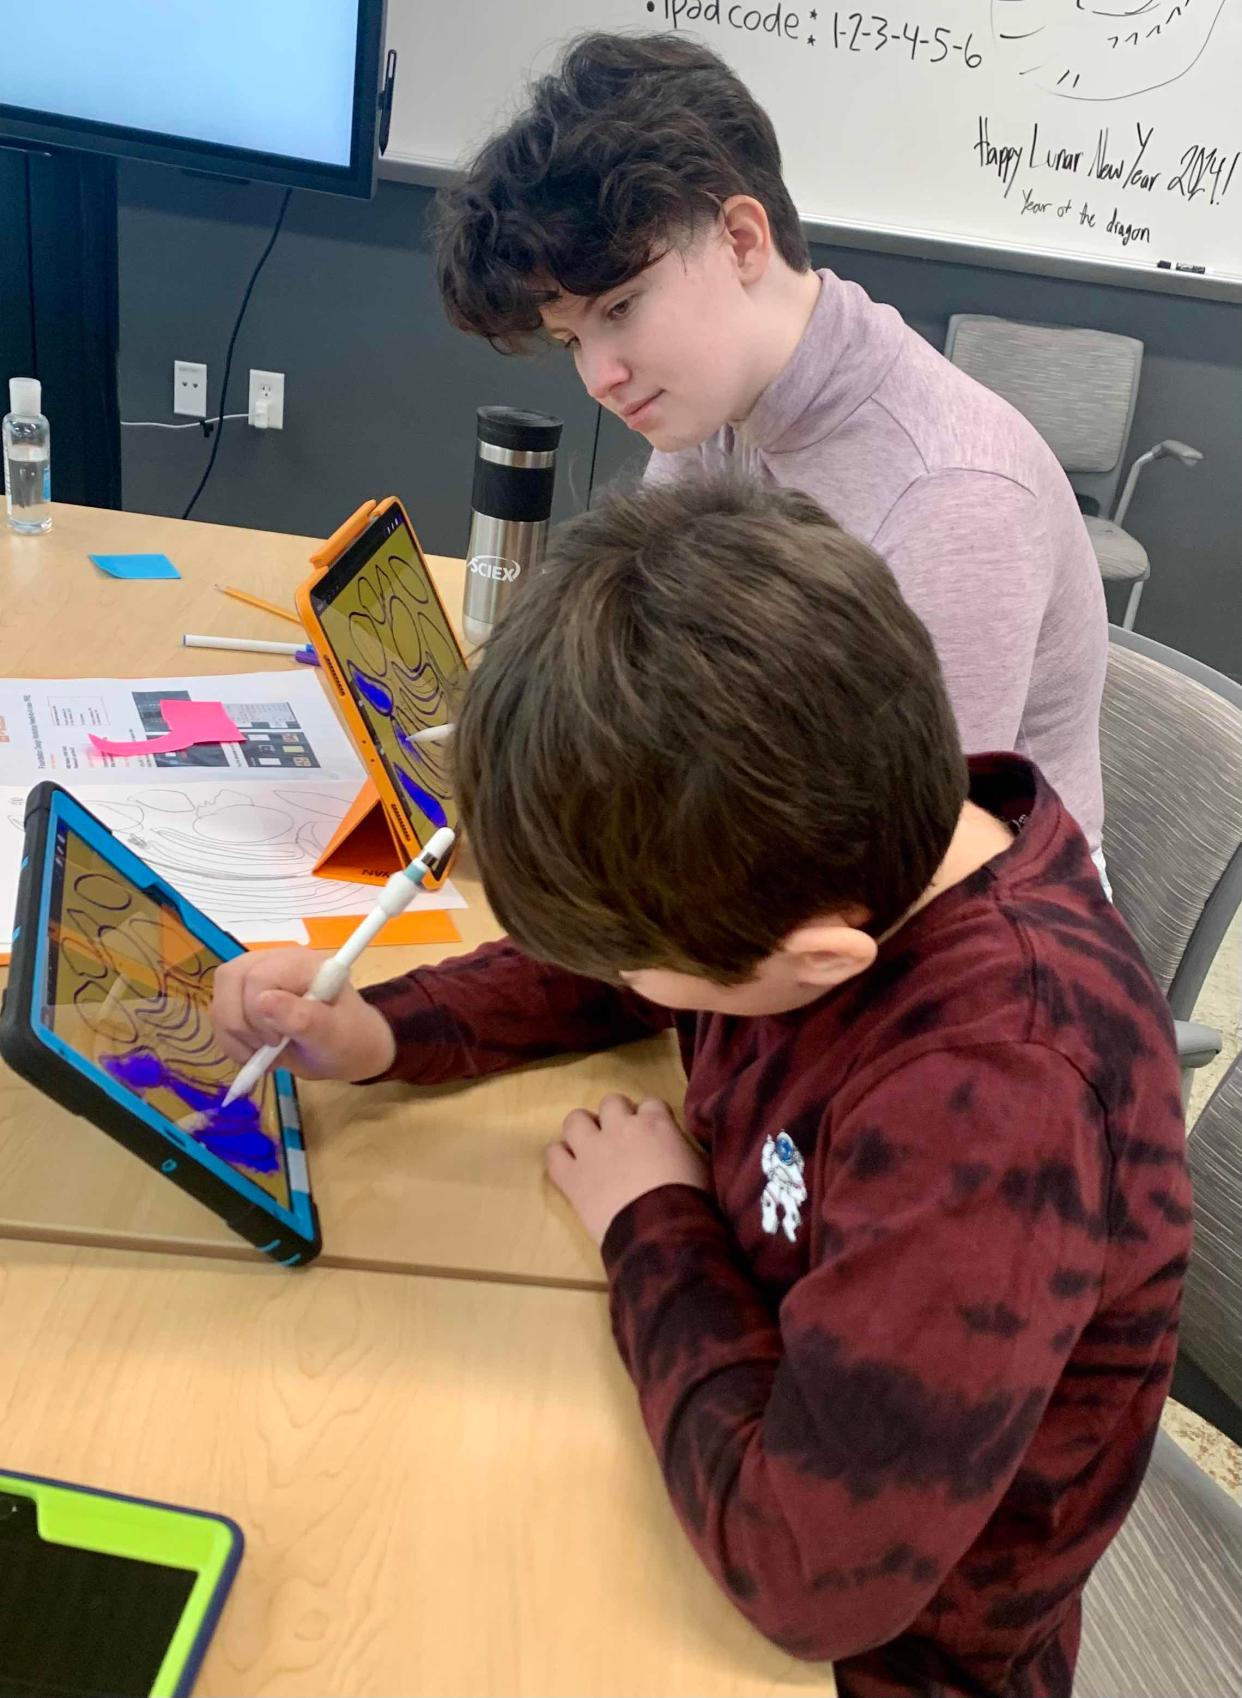 Islands of Brilliance student, Neven, works with mentor Monty on a technology-based art project.